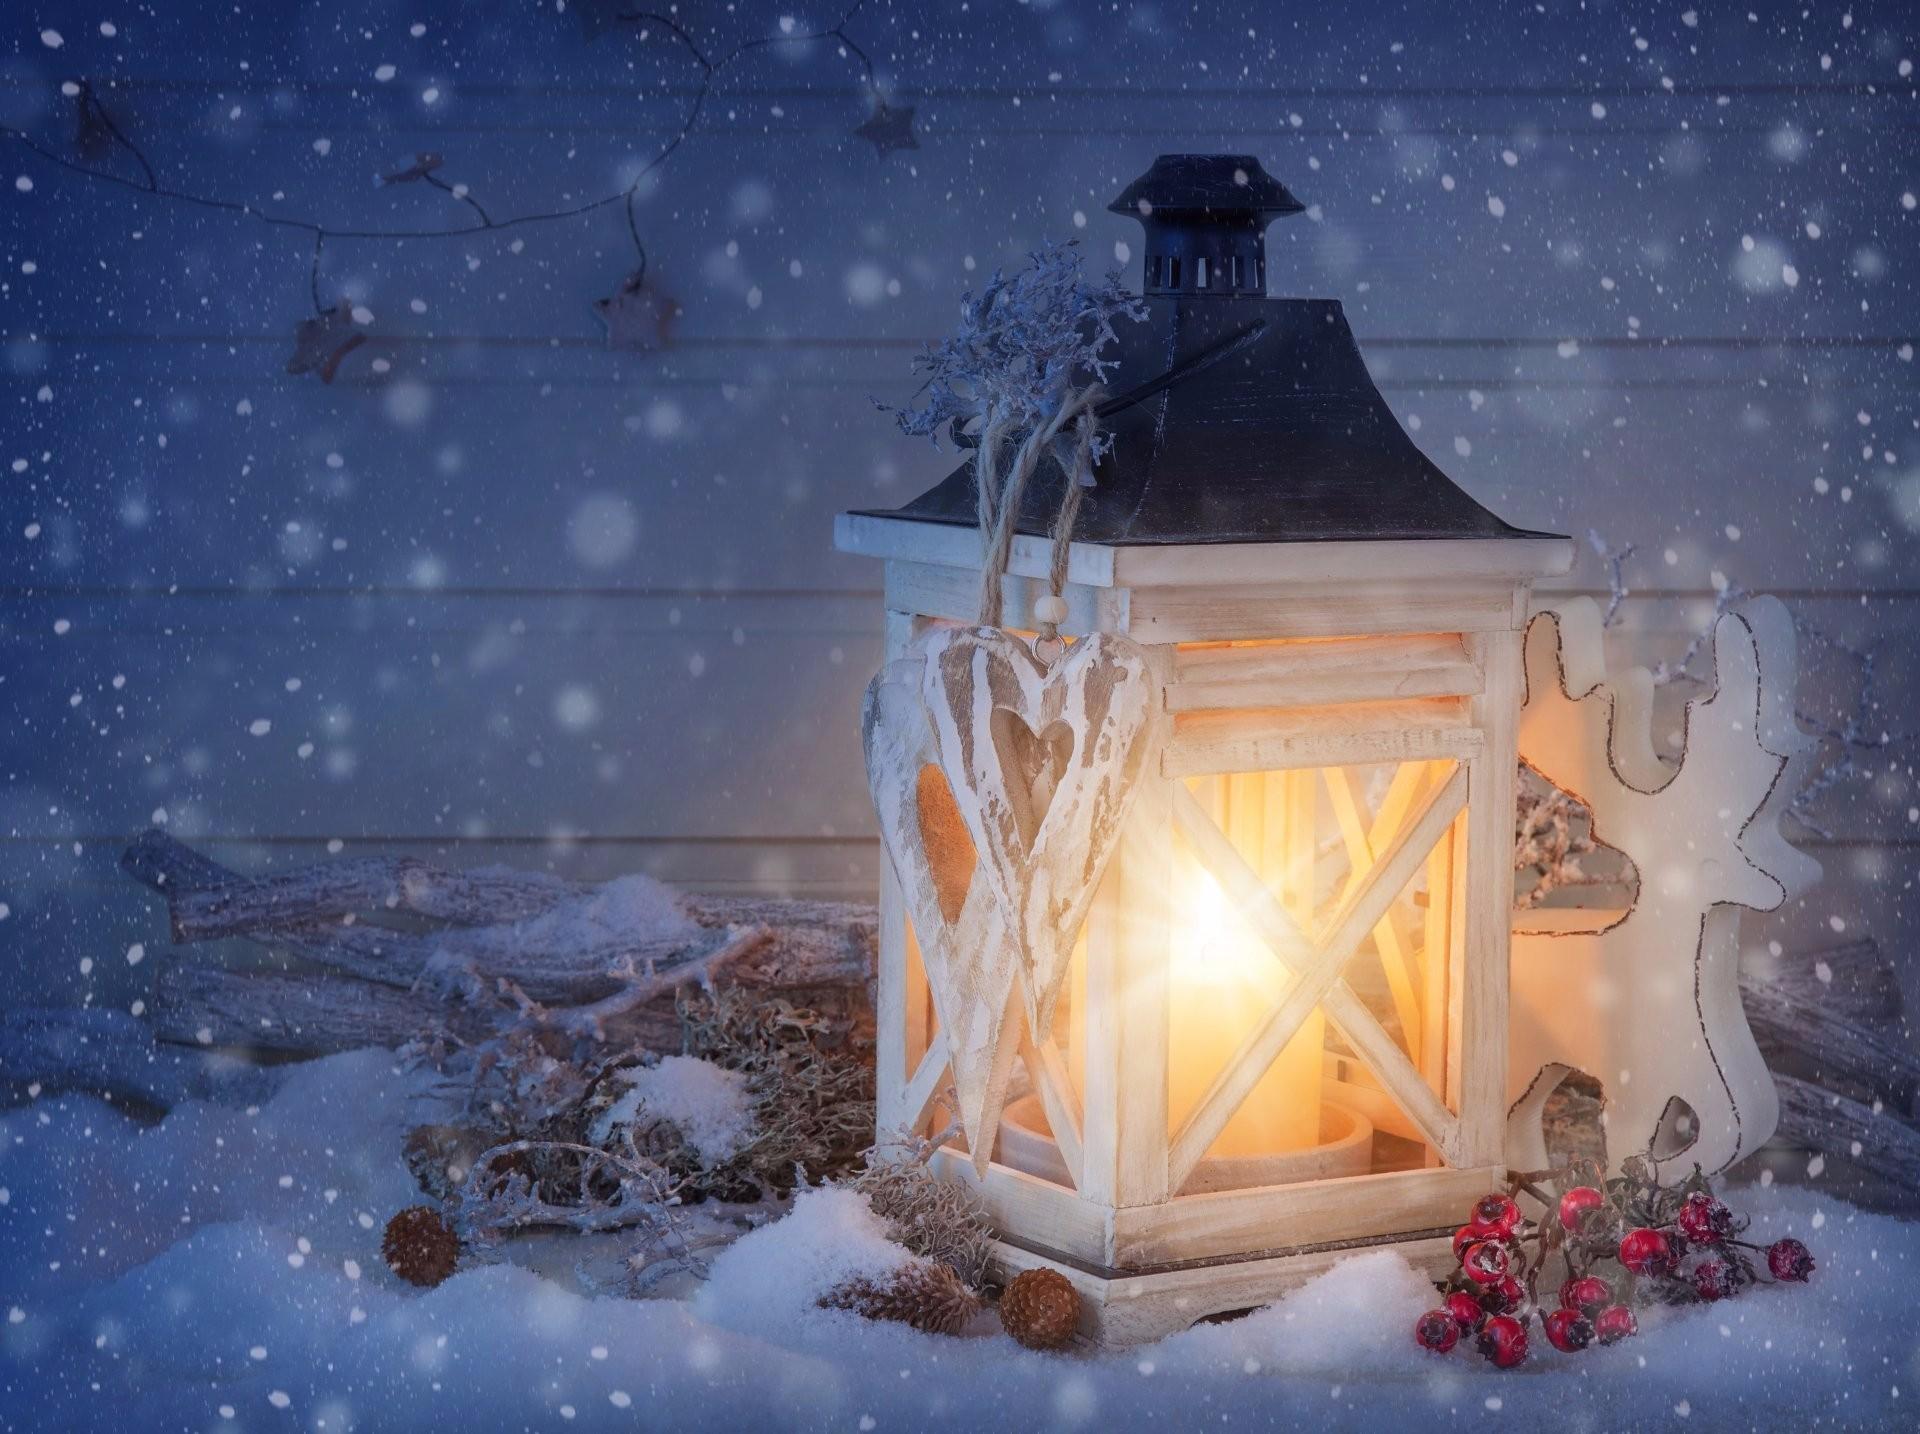 Lantern in the Snow at Christmas HD Wallpaper. Background